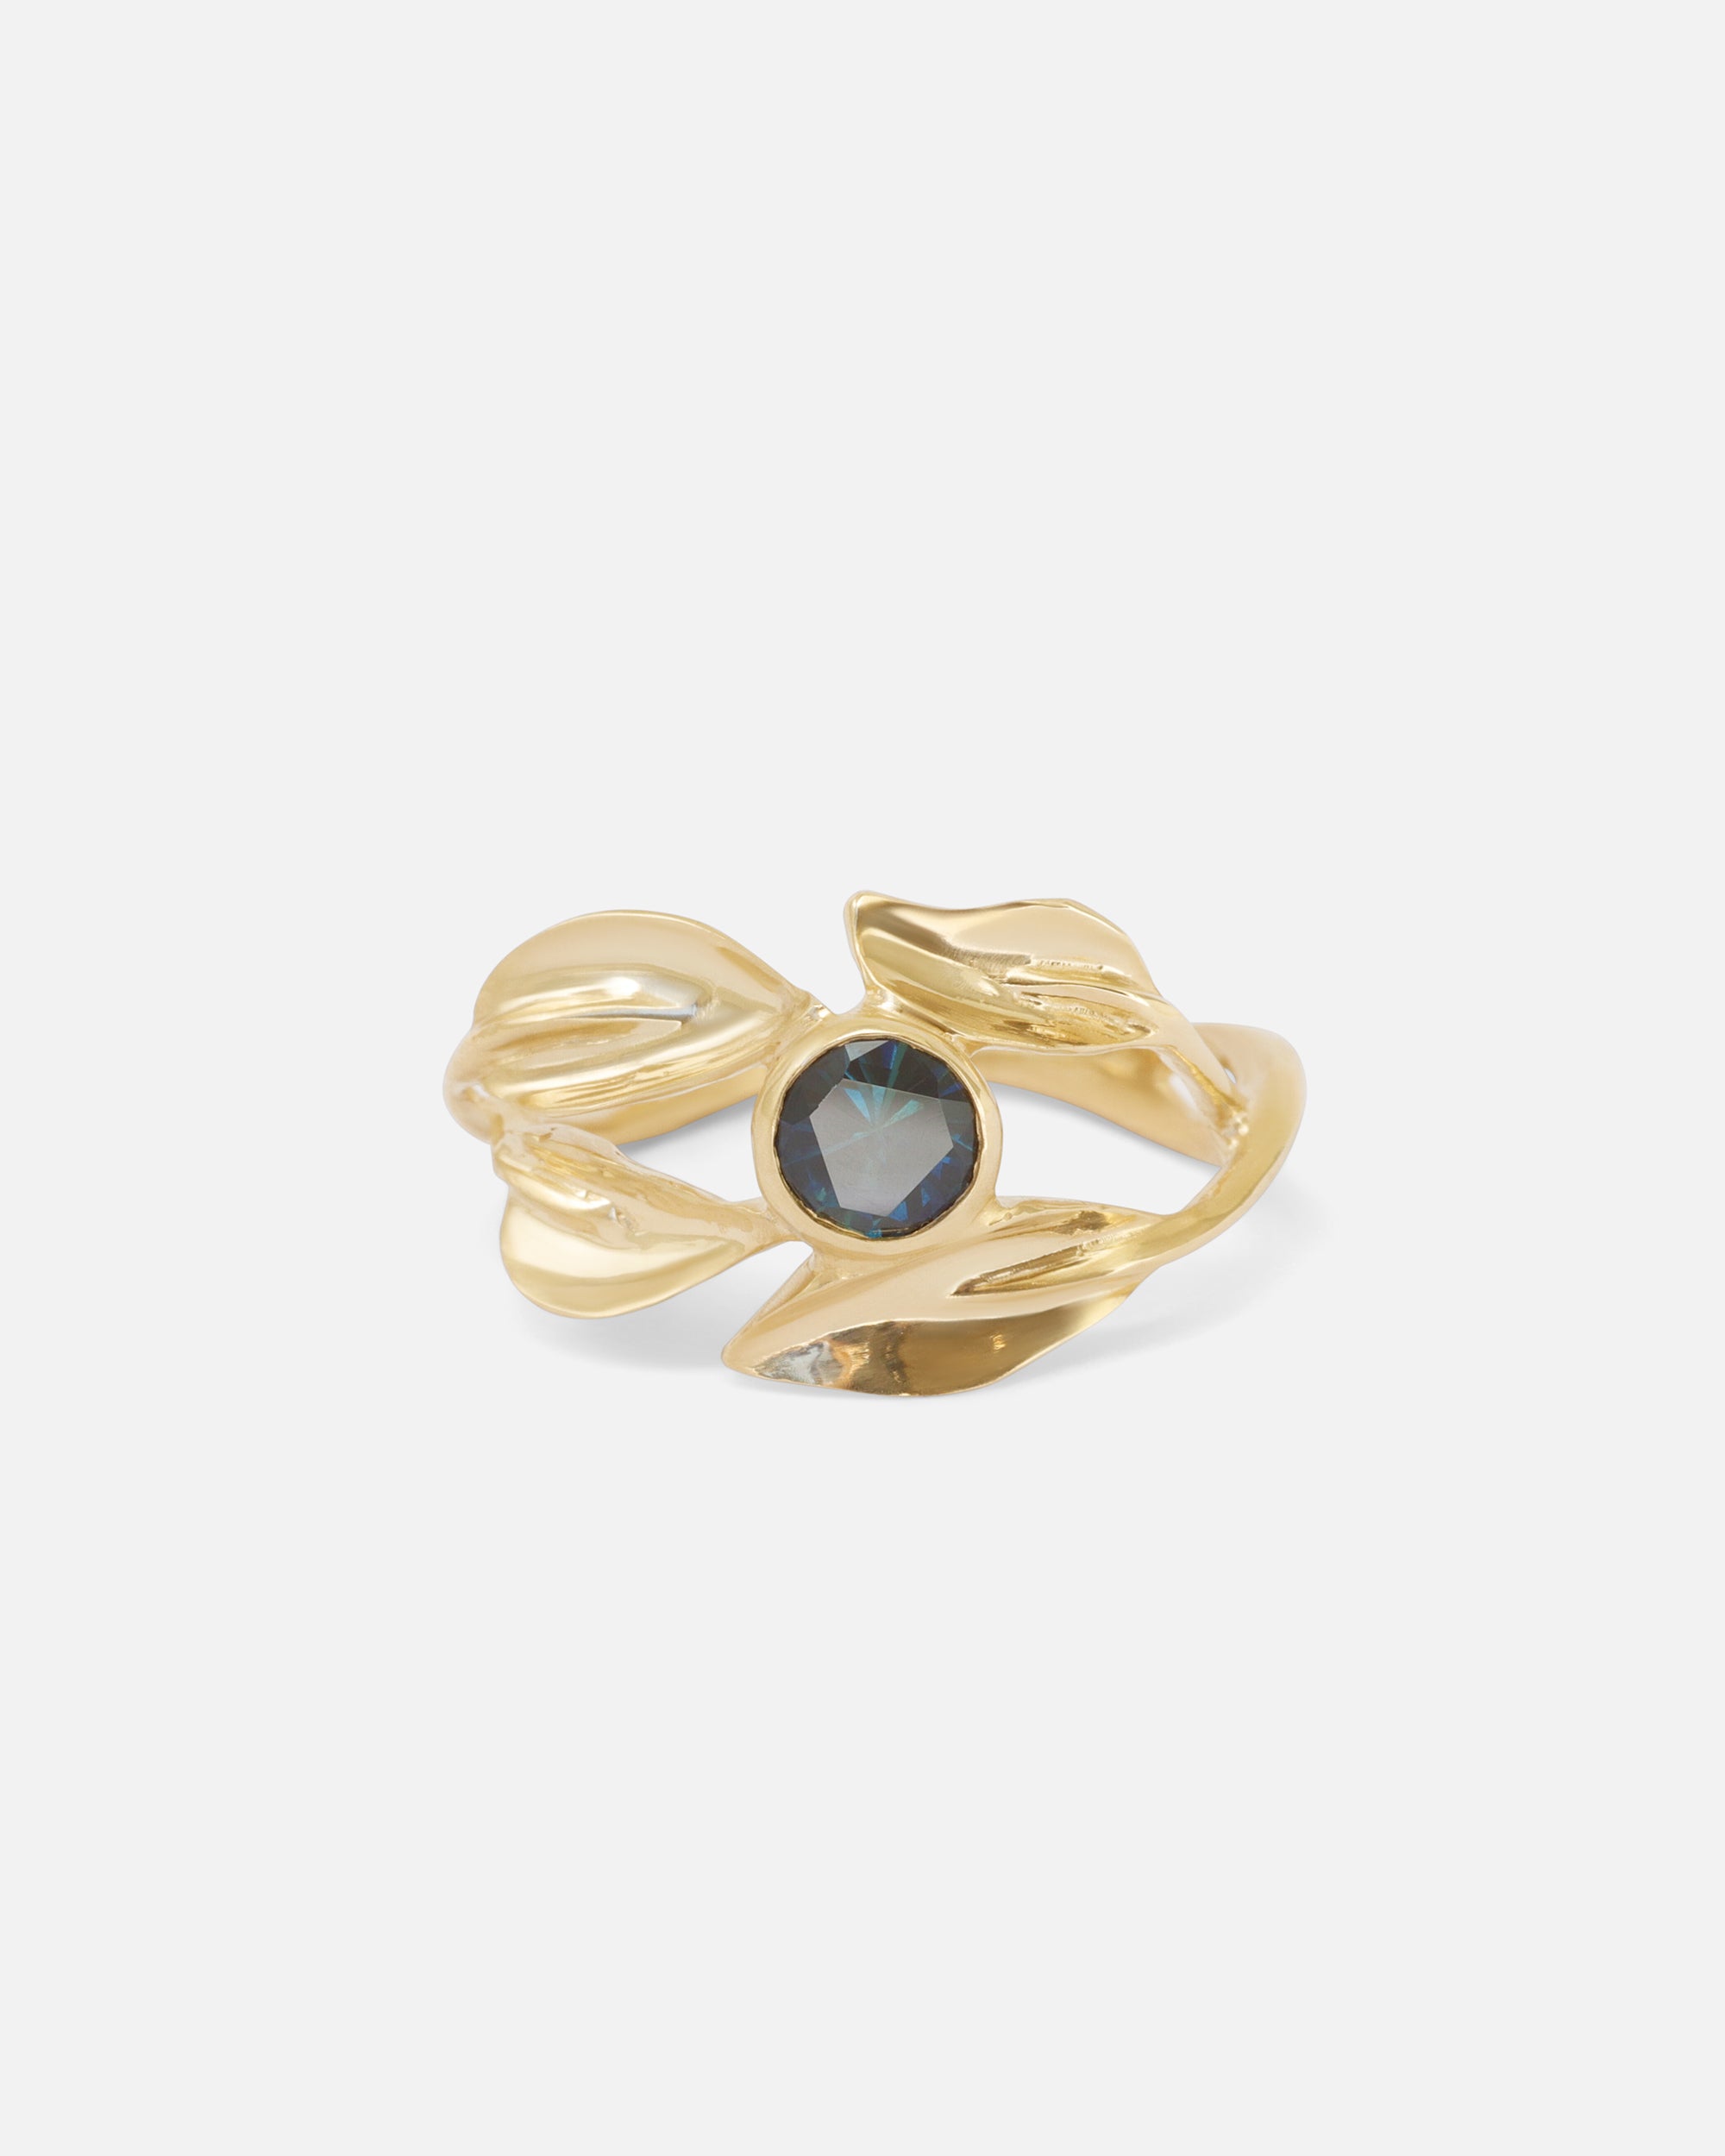 Willow / Kenyan Sapphire Ring By Kestrel Dillon in ENGAGEMENT Category